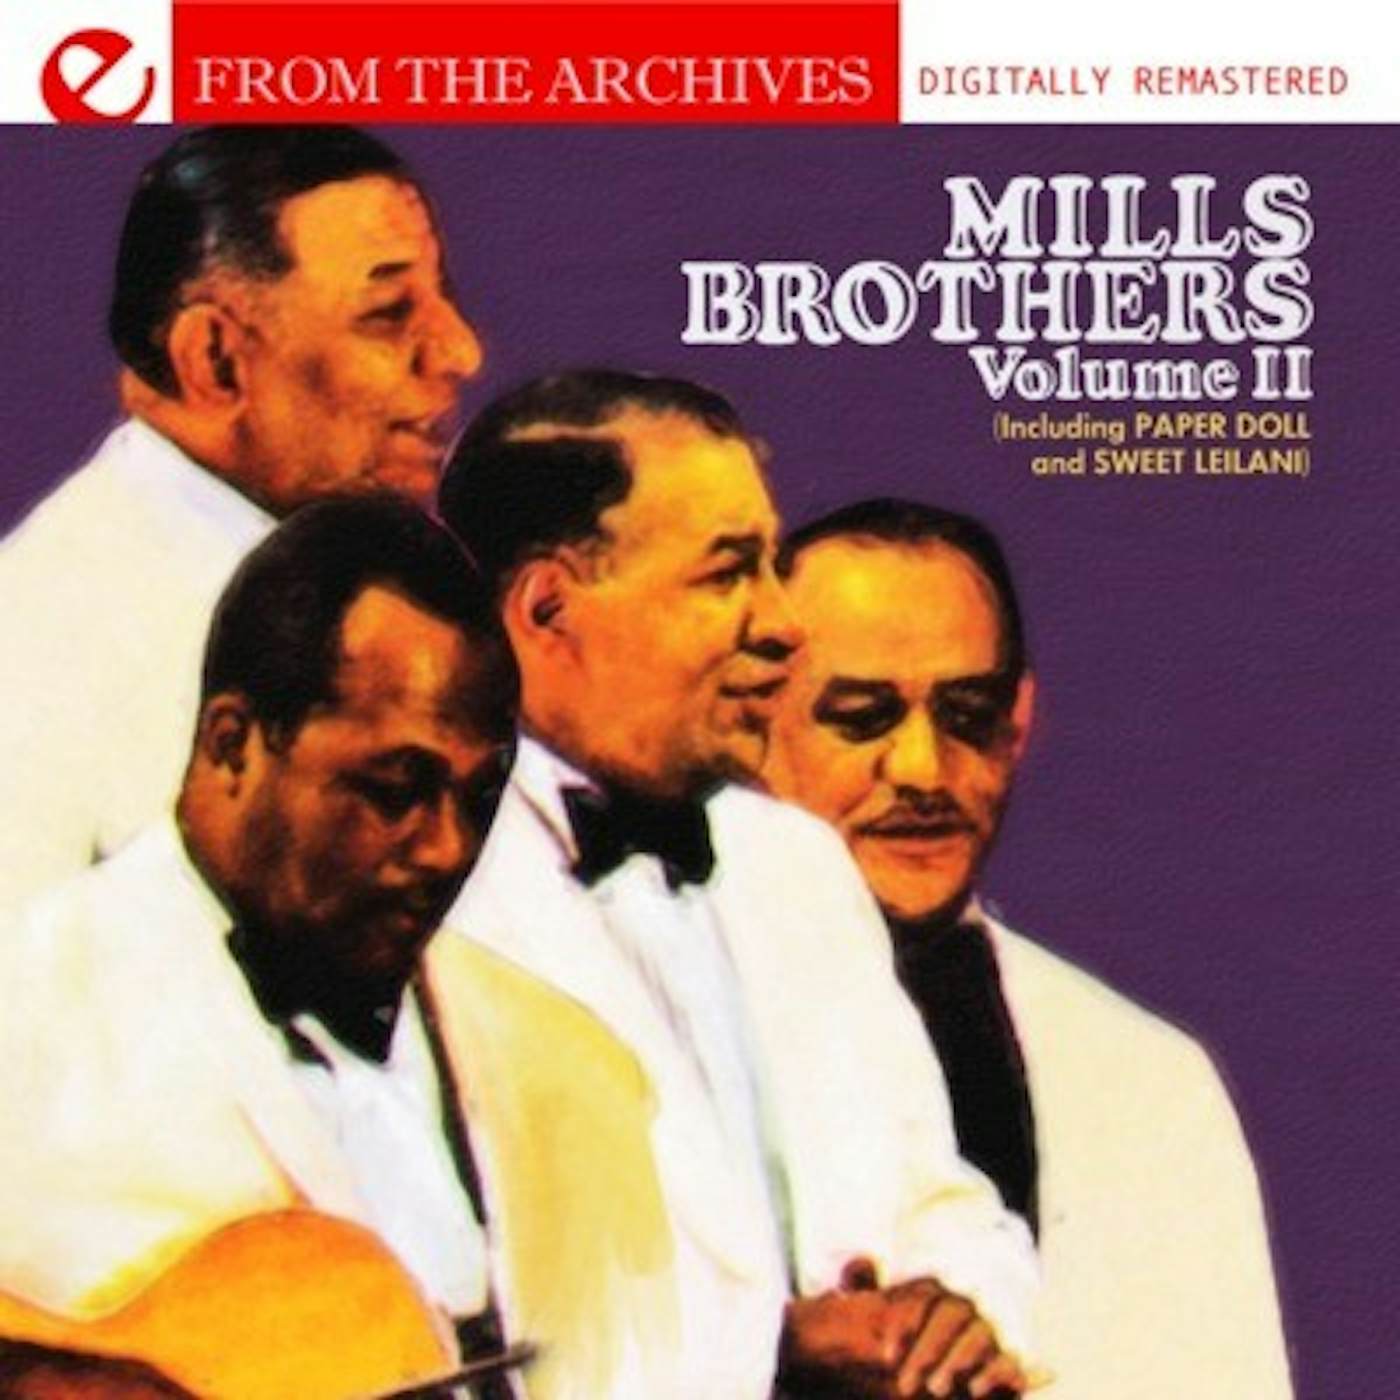 The Mills Brothers 2 CD